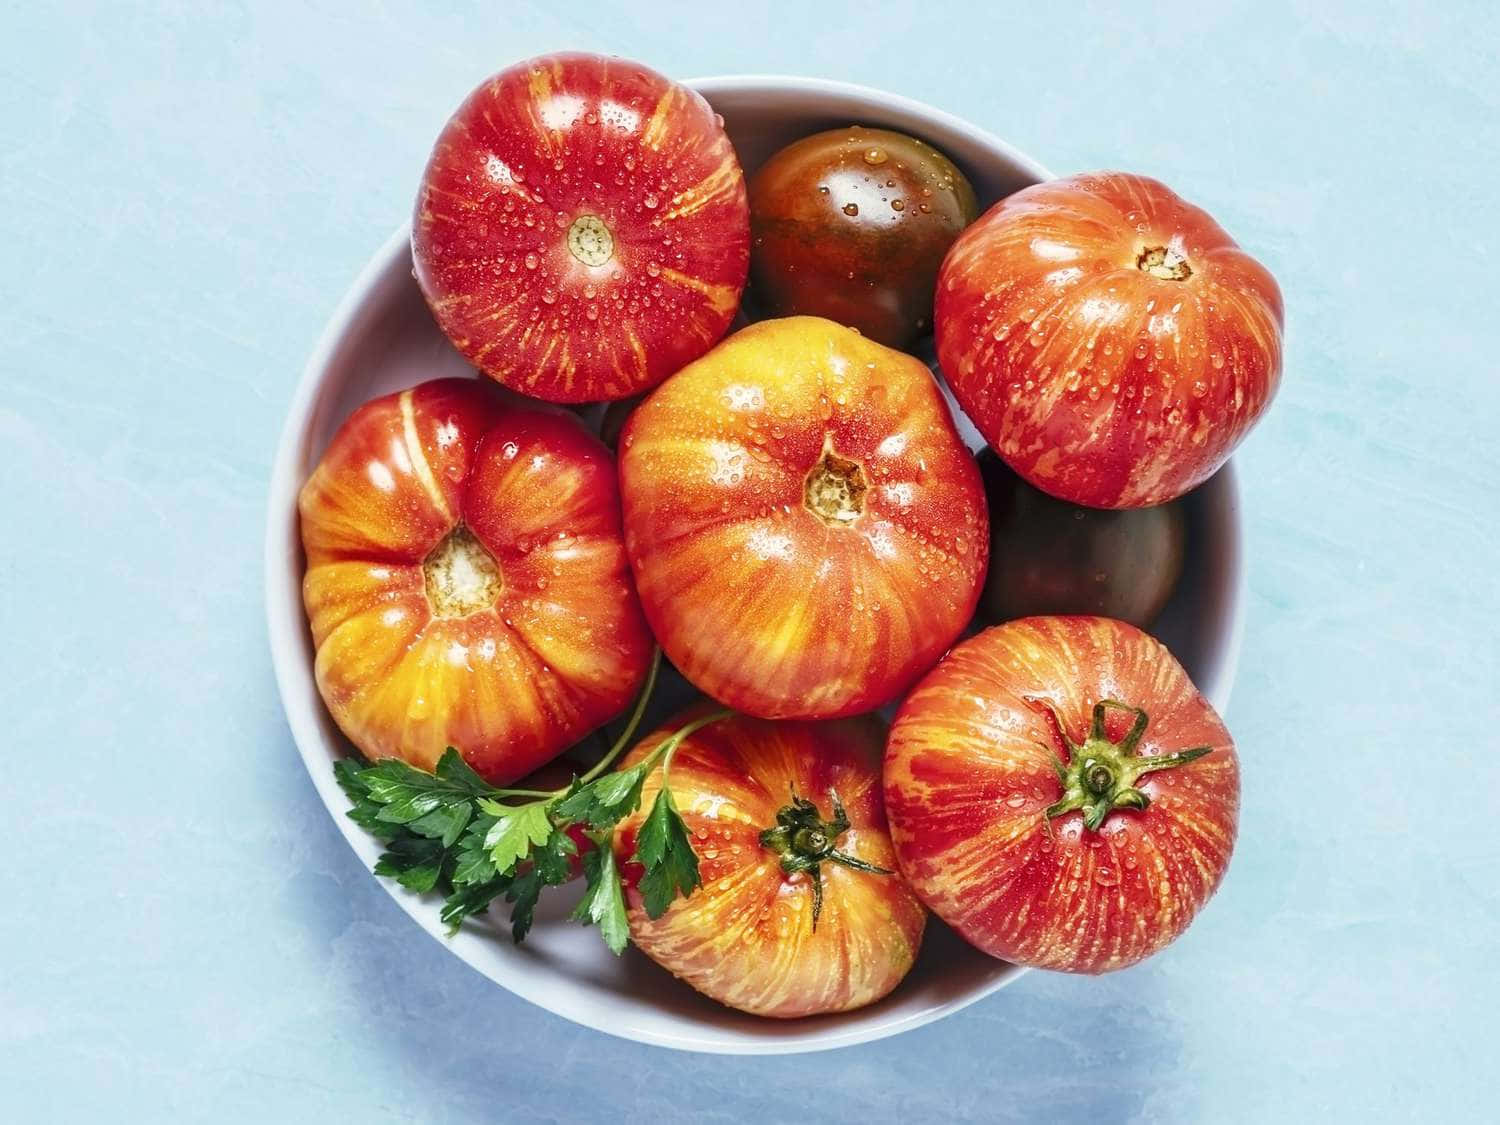 A Bowl Of Tomatoes With Herbs On A Blue Surface